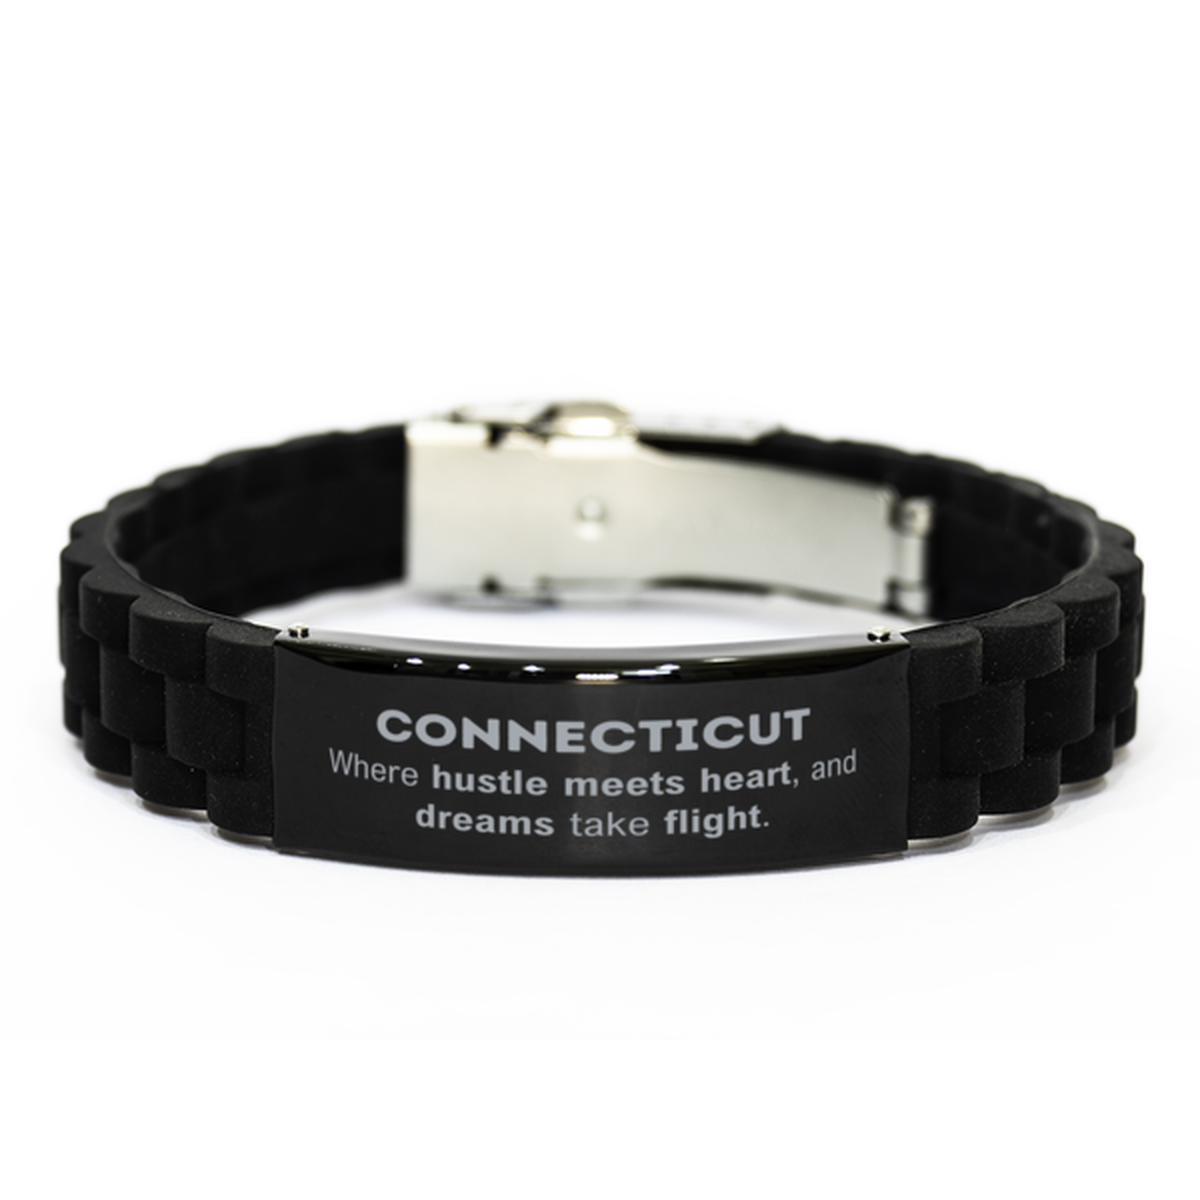 Connecticut: Where hustle meets heart, and dreams take flight, Connecticut Gifts, Proud Connecticut Christmas Birthday Connecticut Black Glidelock Clasp Bracelet, Connecticut State People, Men, Women, Friends